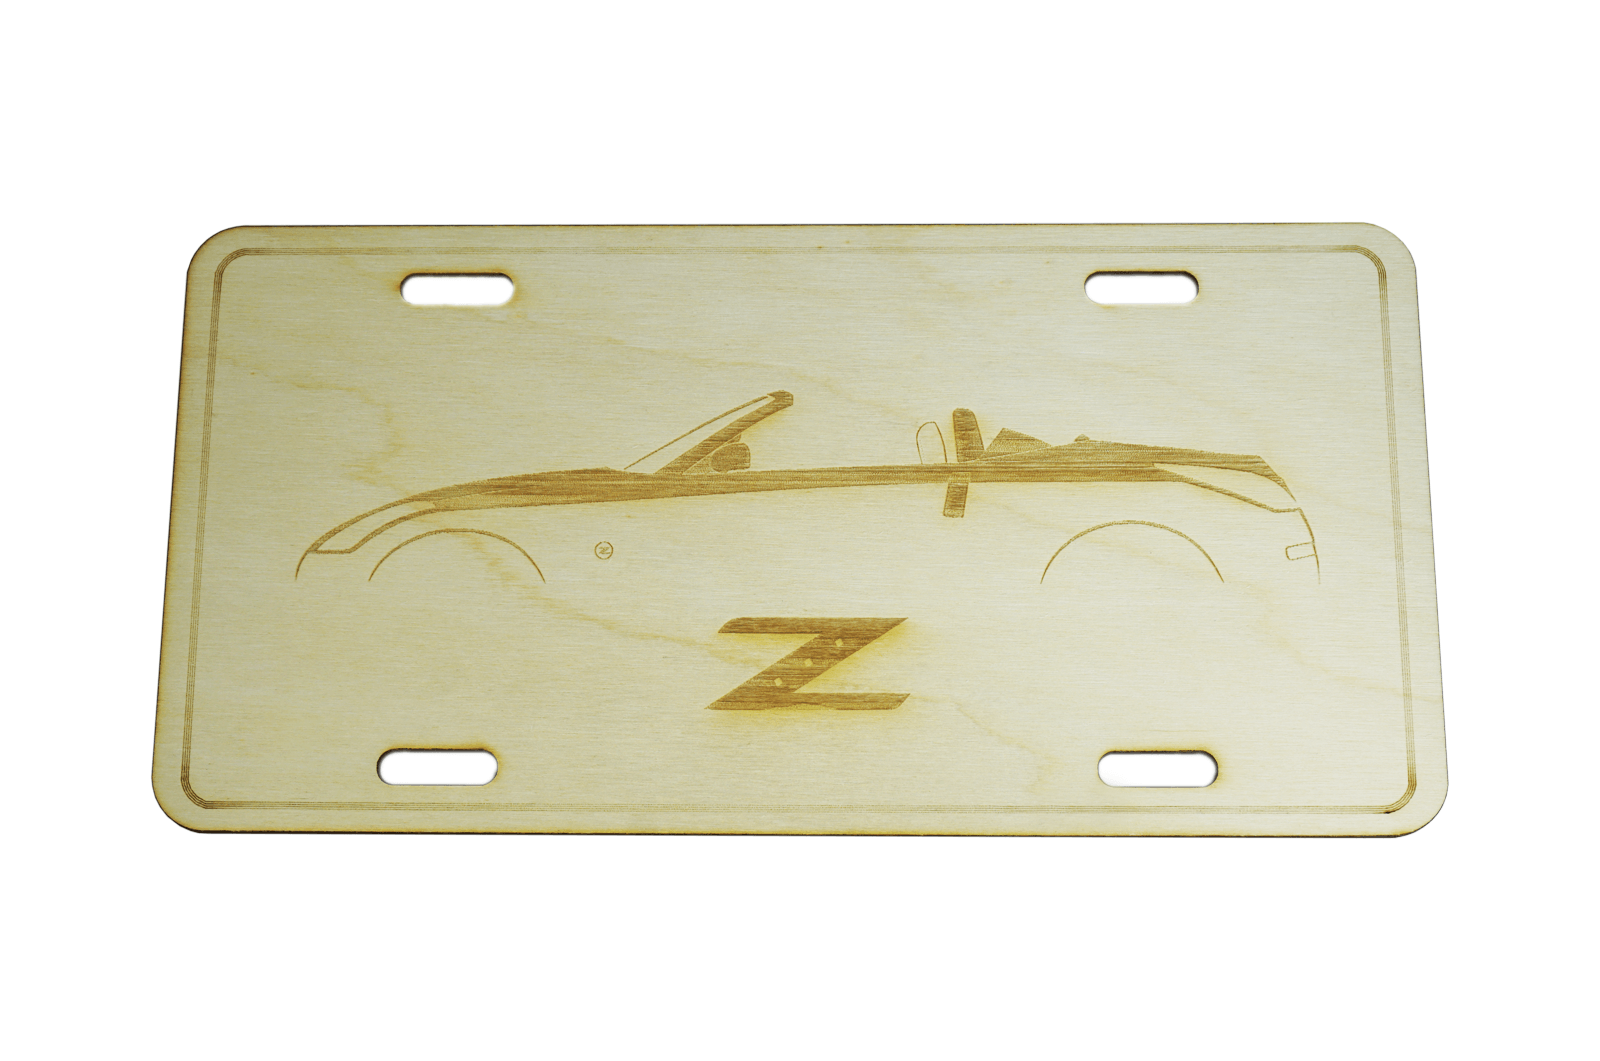 ZSPEC Nissan 350z Roadster License Plate, Birch, Ornament for Office, Garage or Man-Cave